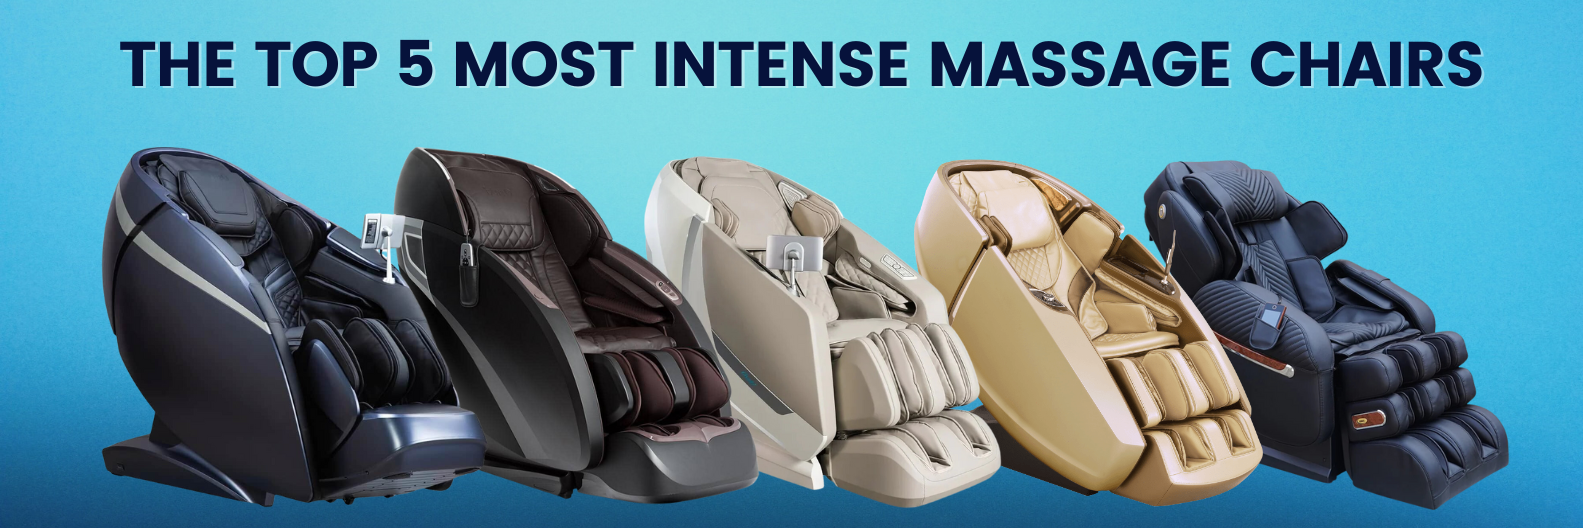 Uncover the top 5 most intense Massage Chairs for unparalleled relaxation. Learn about the benefits of massage chairs for enhancing your physical comfort and overall wellness.